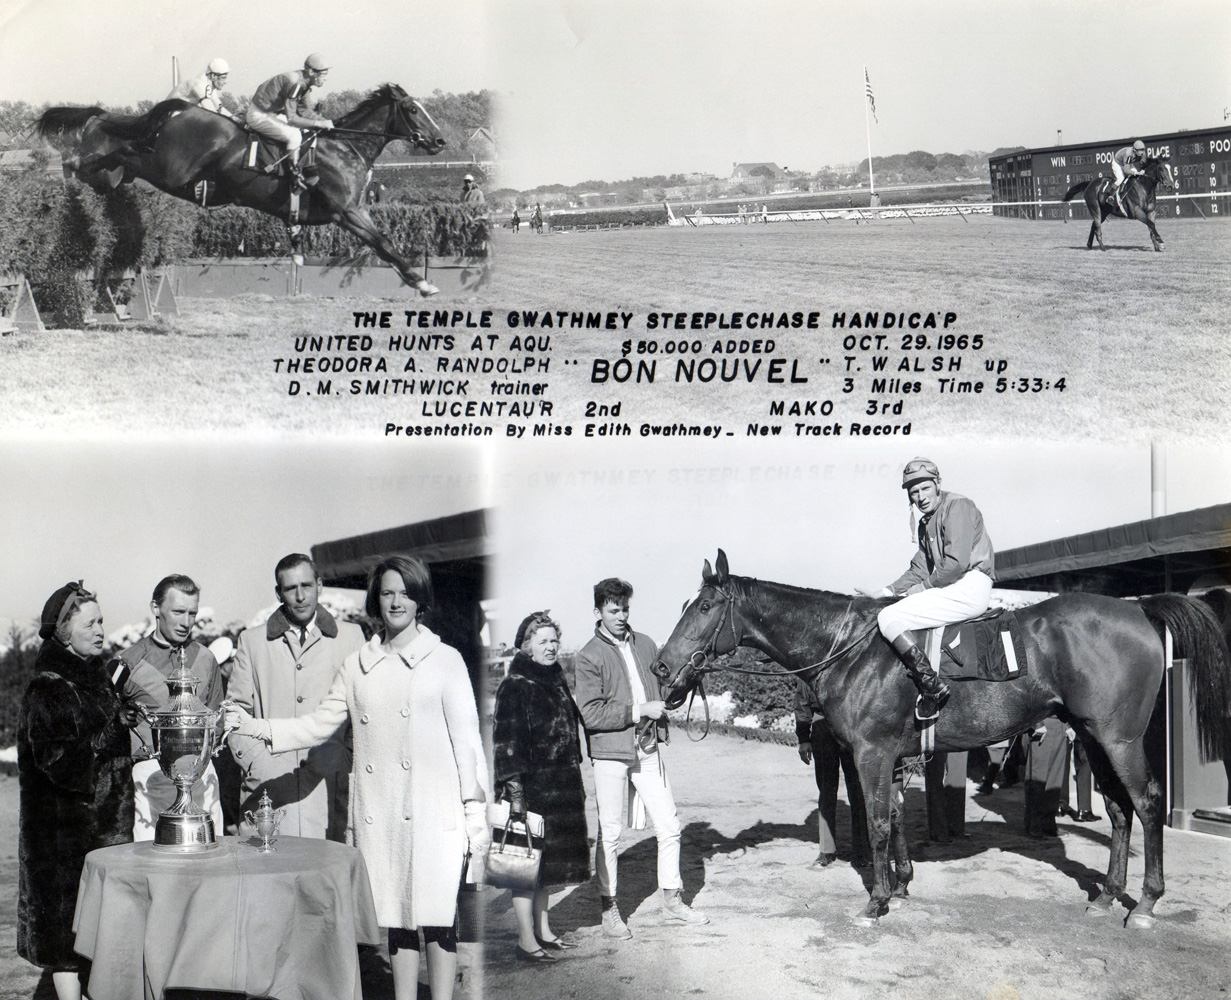 Win composite from the 1965 Temple Gwathmey Steeplechase Handicap at Aqueduct, won by Tommy Walsh and Bon Nouvel (NYRA/Museum Collection)